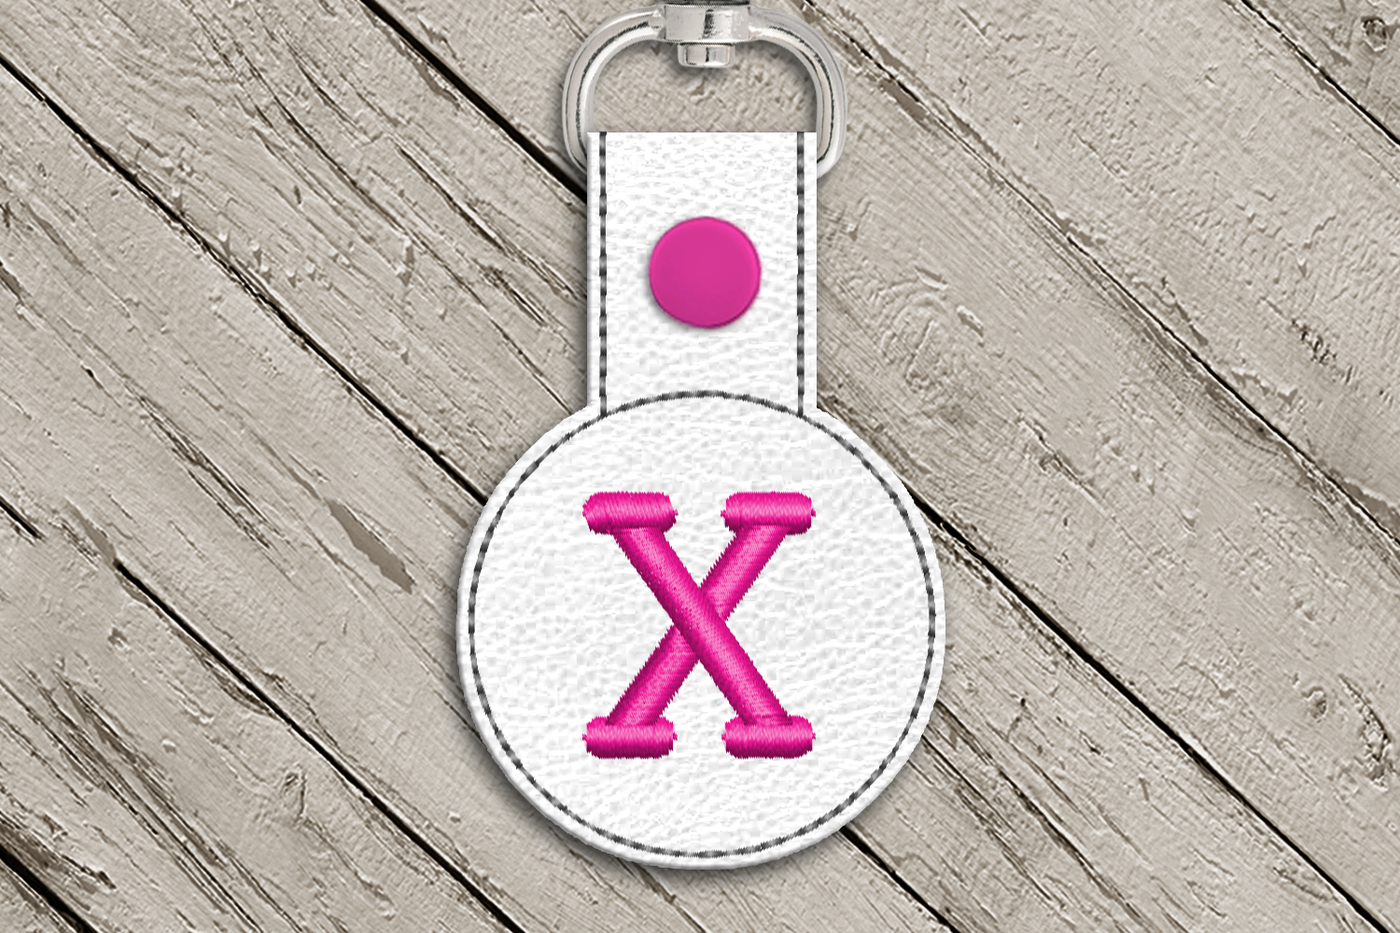 Letter X in the hoop key fob design